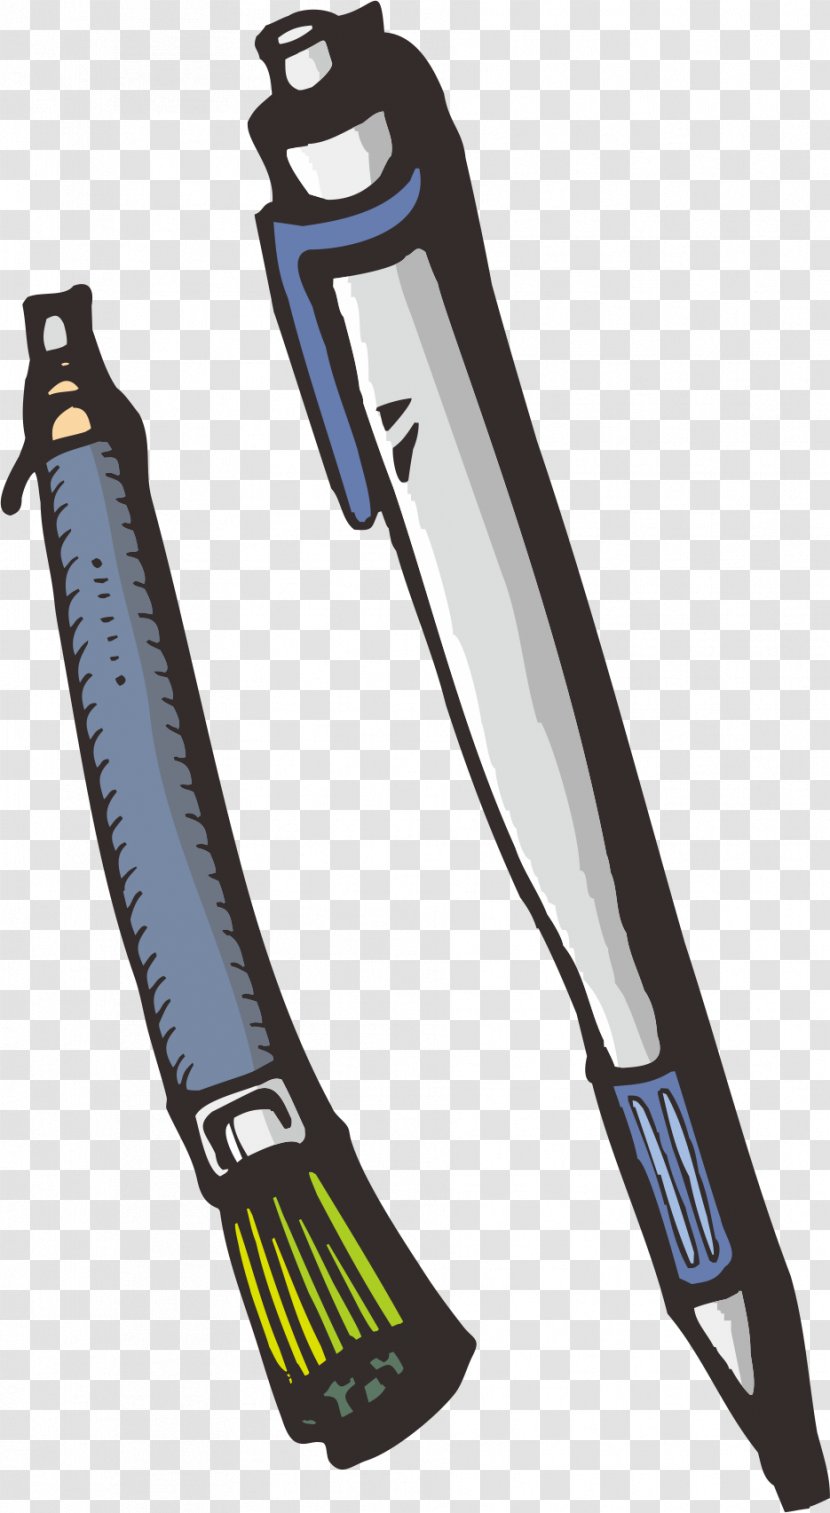 Pencil Stationery - Hardware - Pen Vector Material Transparent PNG